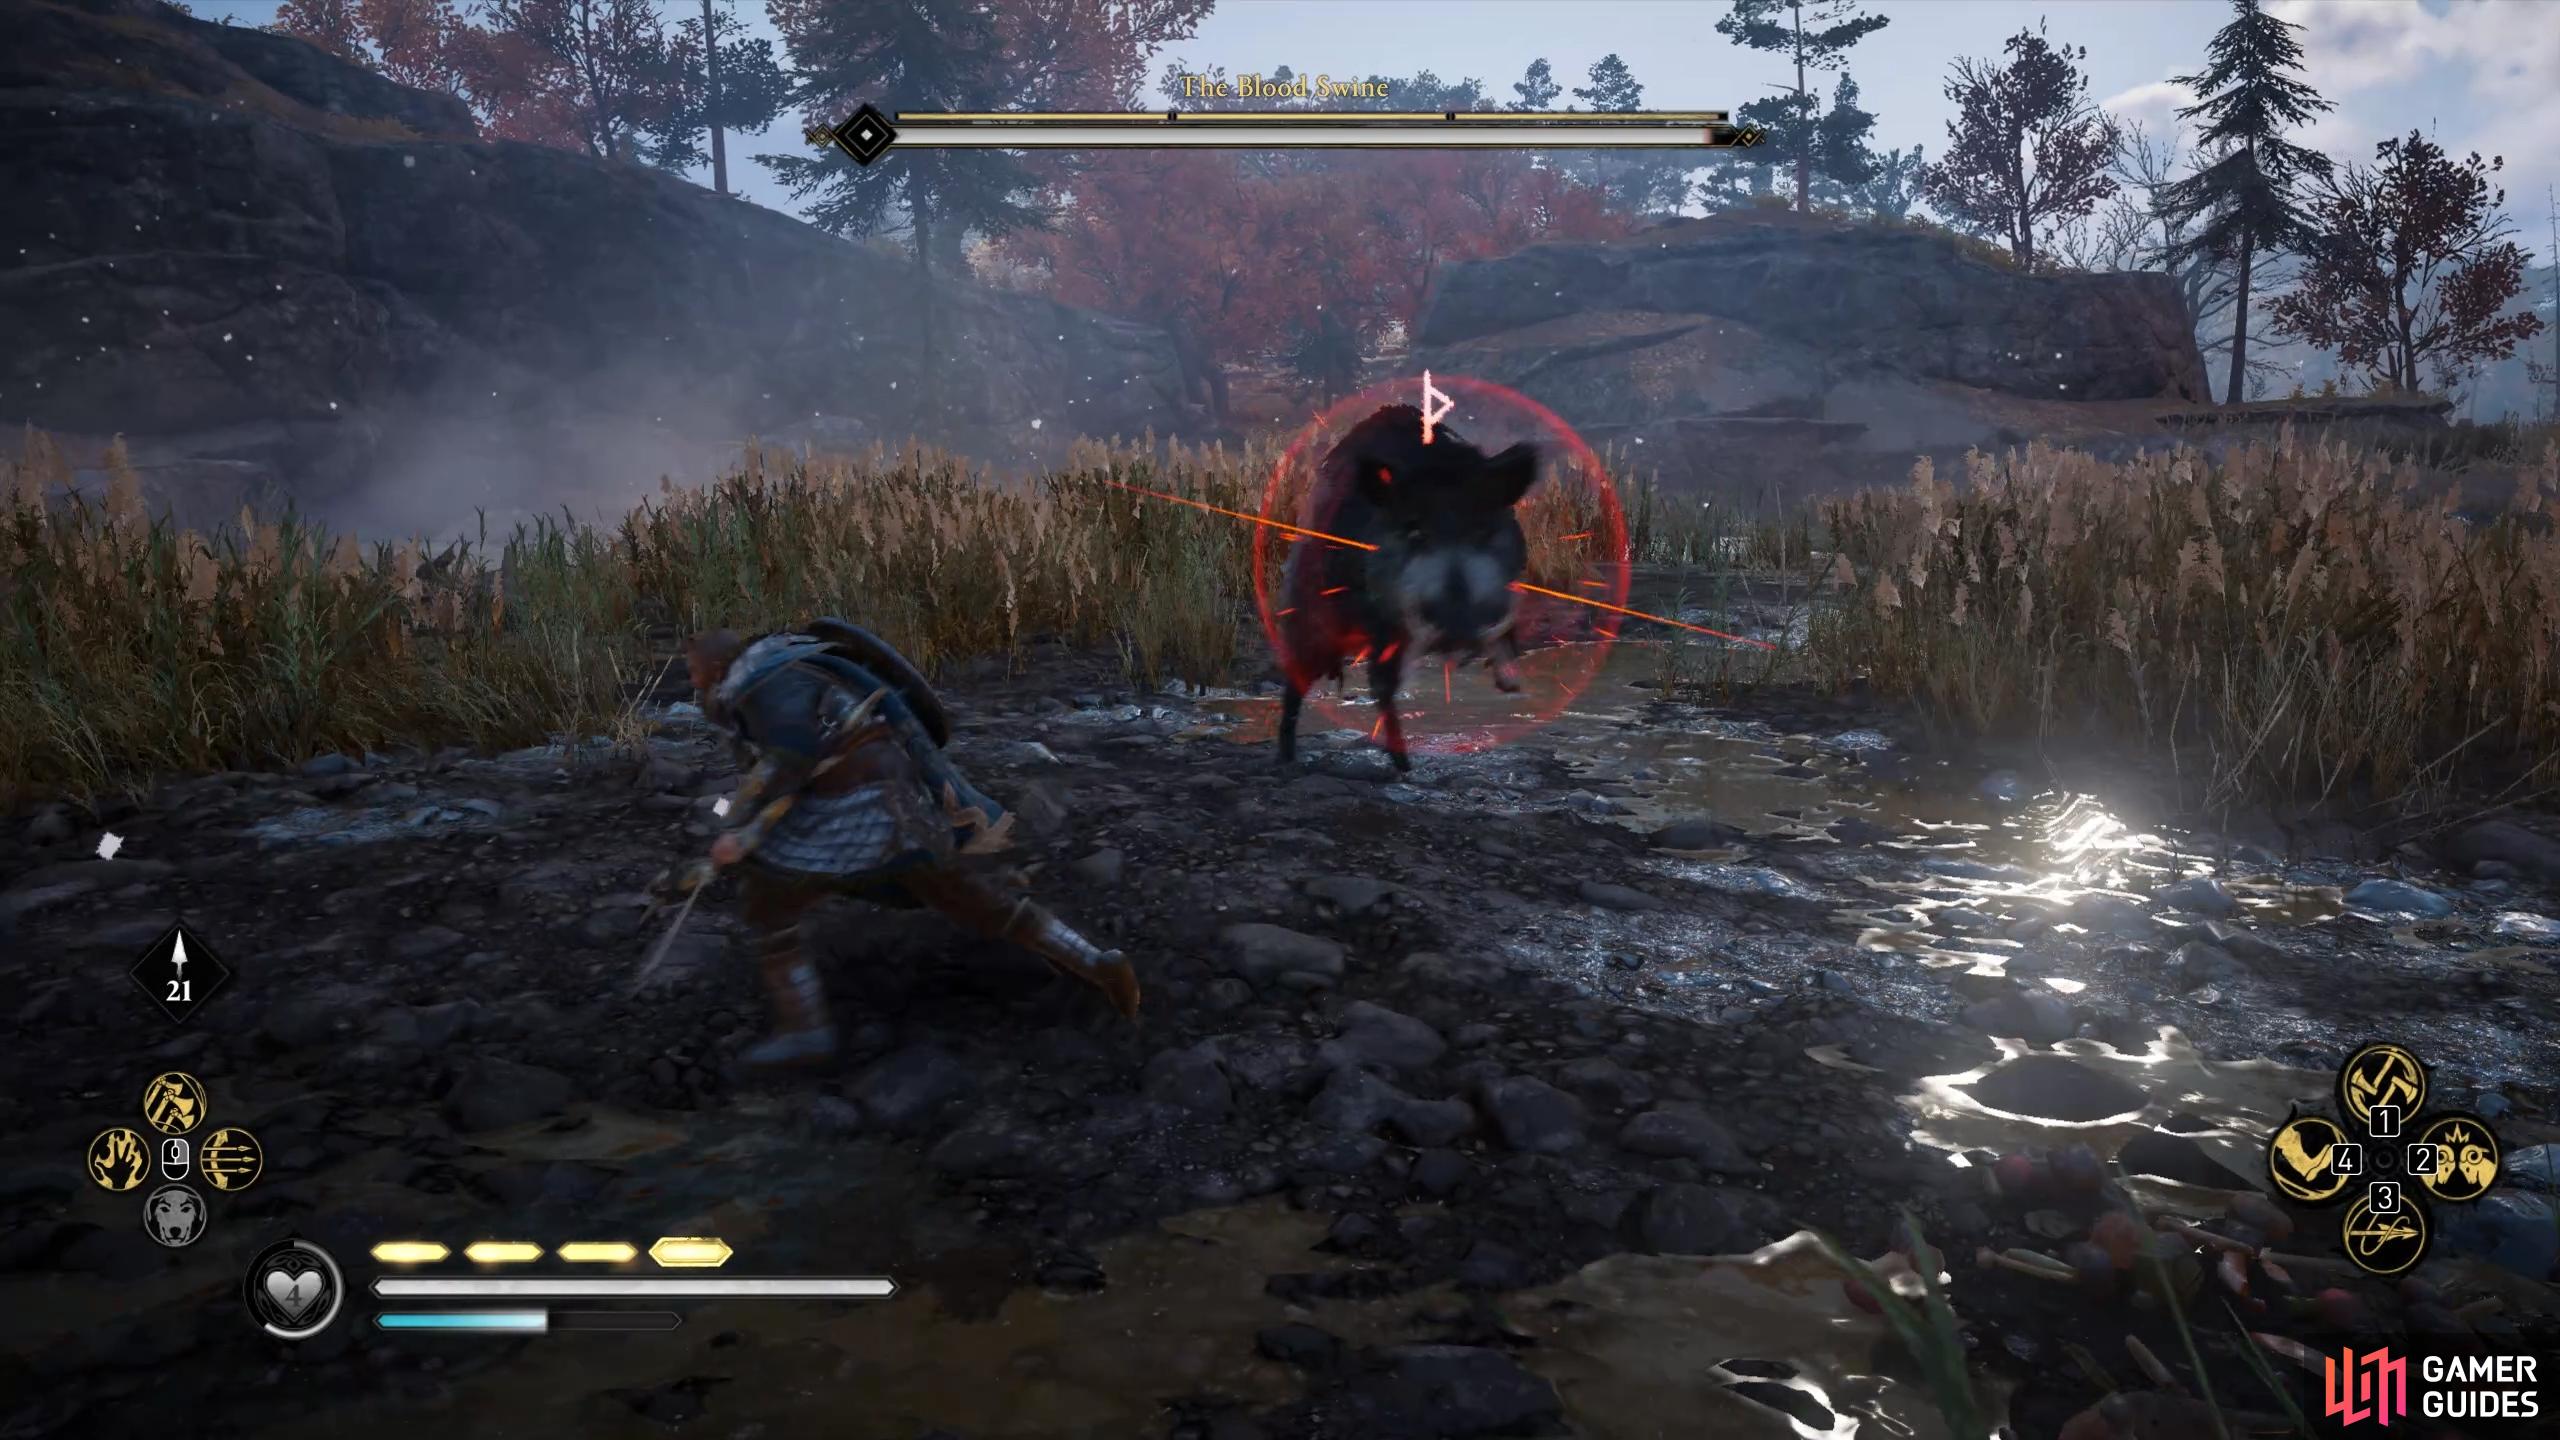 You can easily avoid the red rune aura attack where the boar is stationary as it kicks into the air.